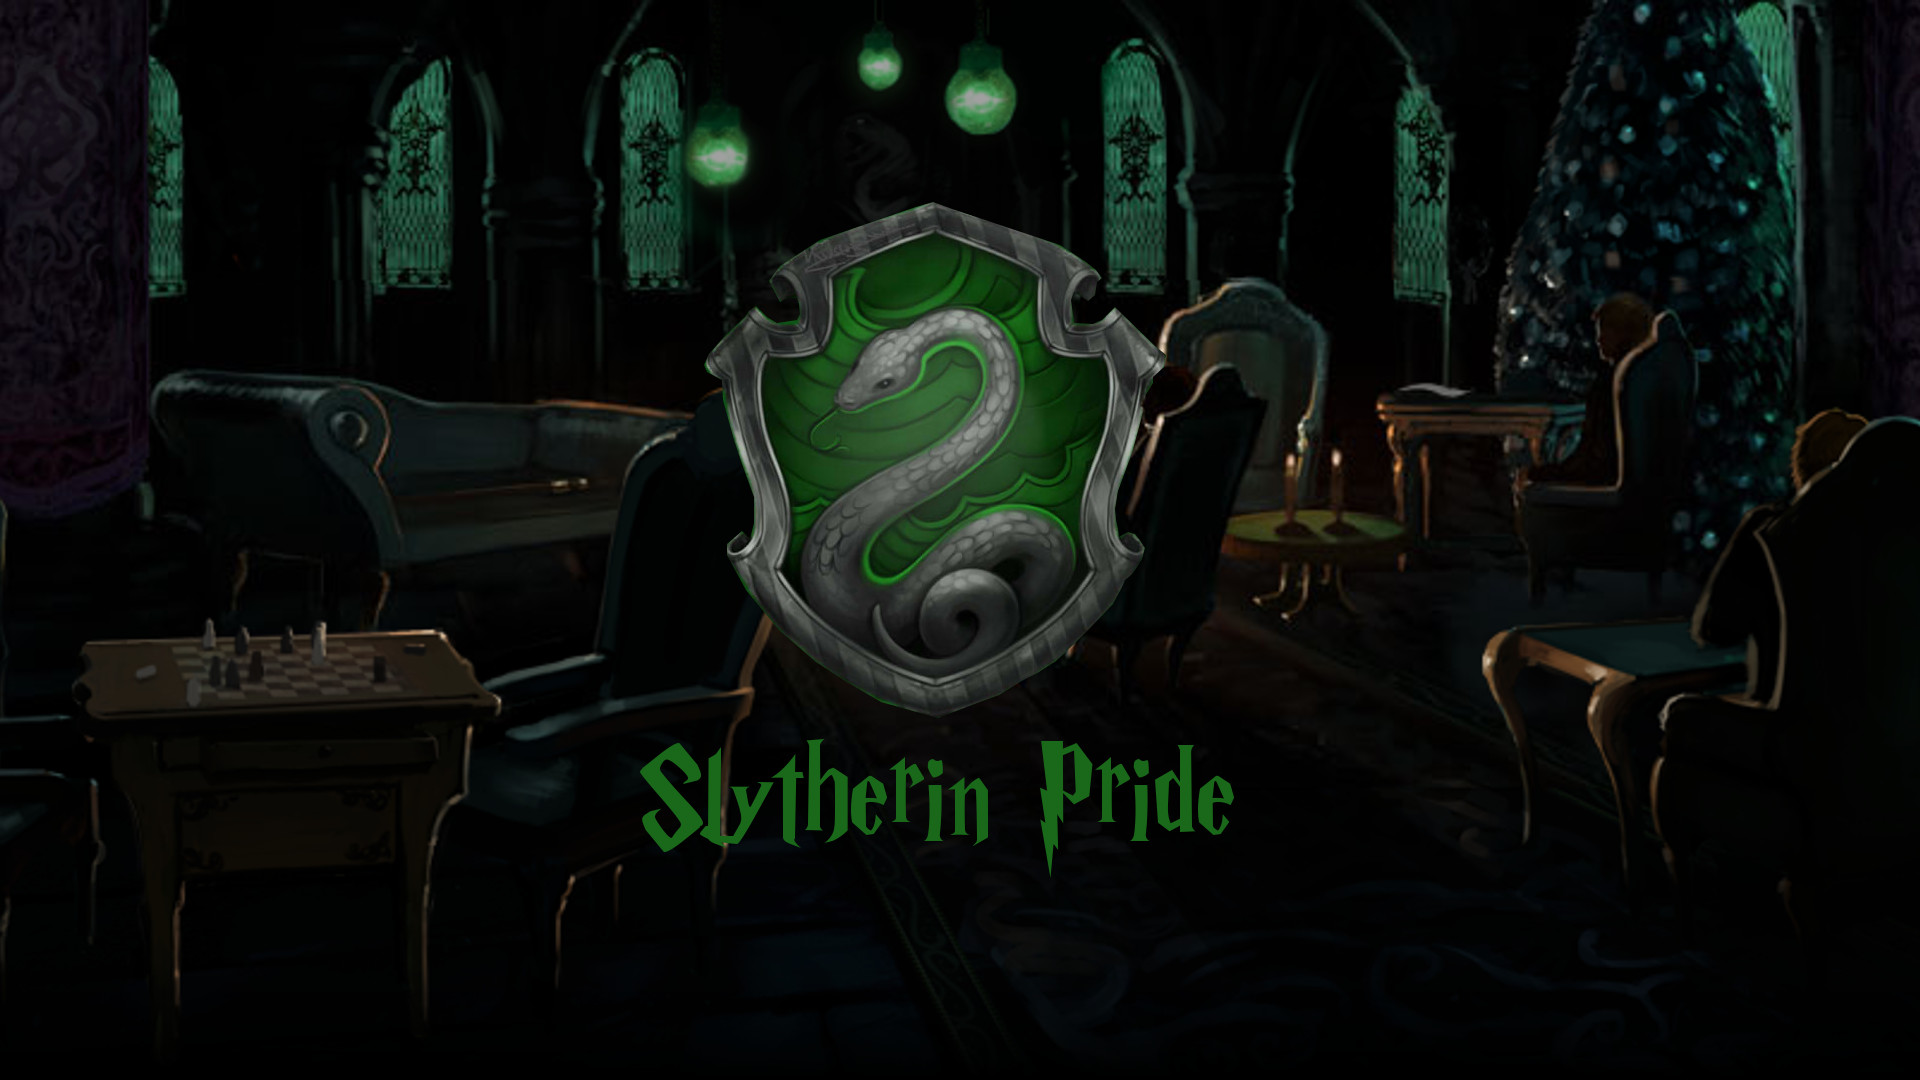 1920x1080 Slytherin common room wallpaper by Thalvunil Slytherin common room wallpaper  by Thalvunil